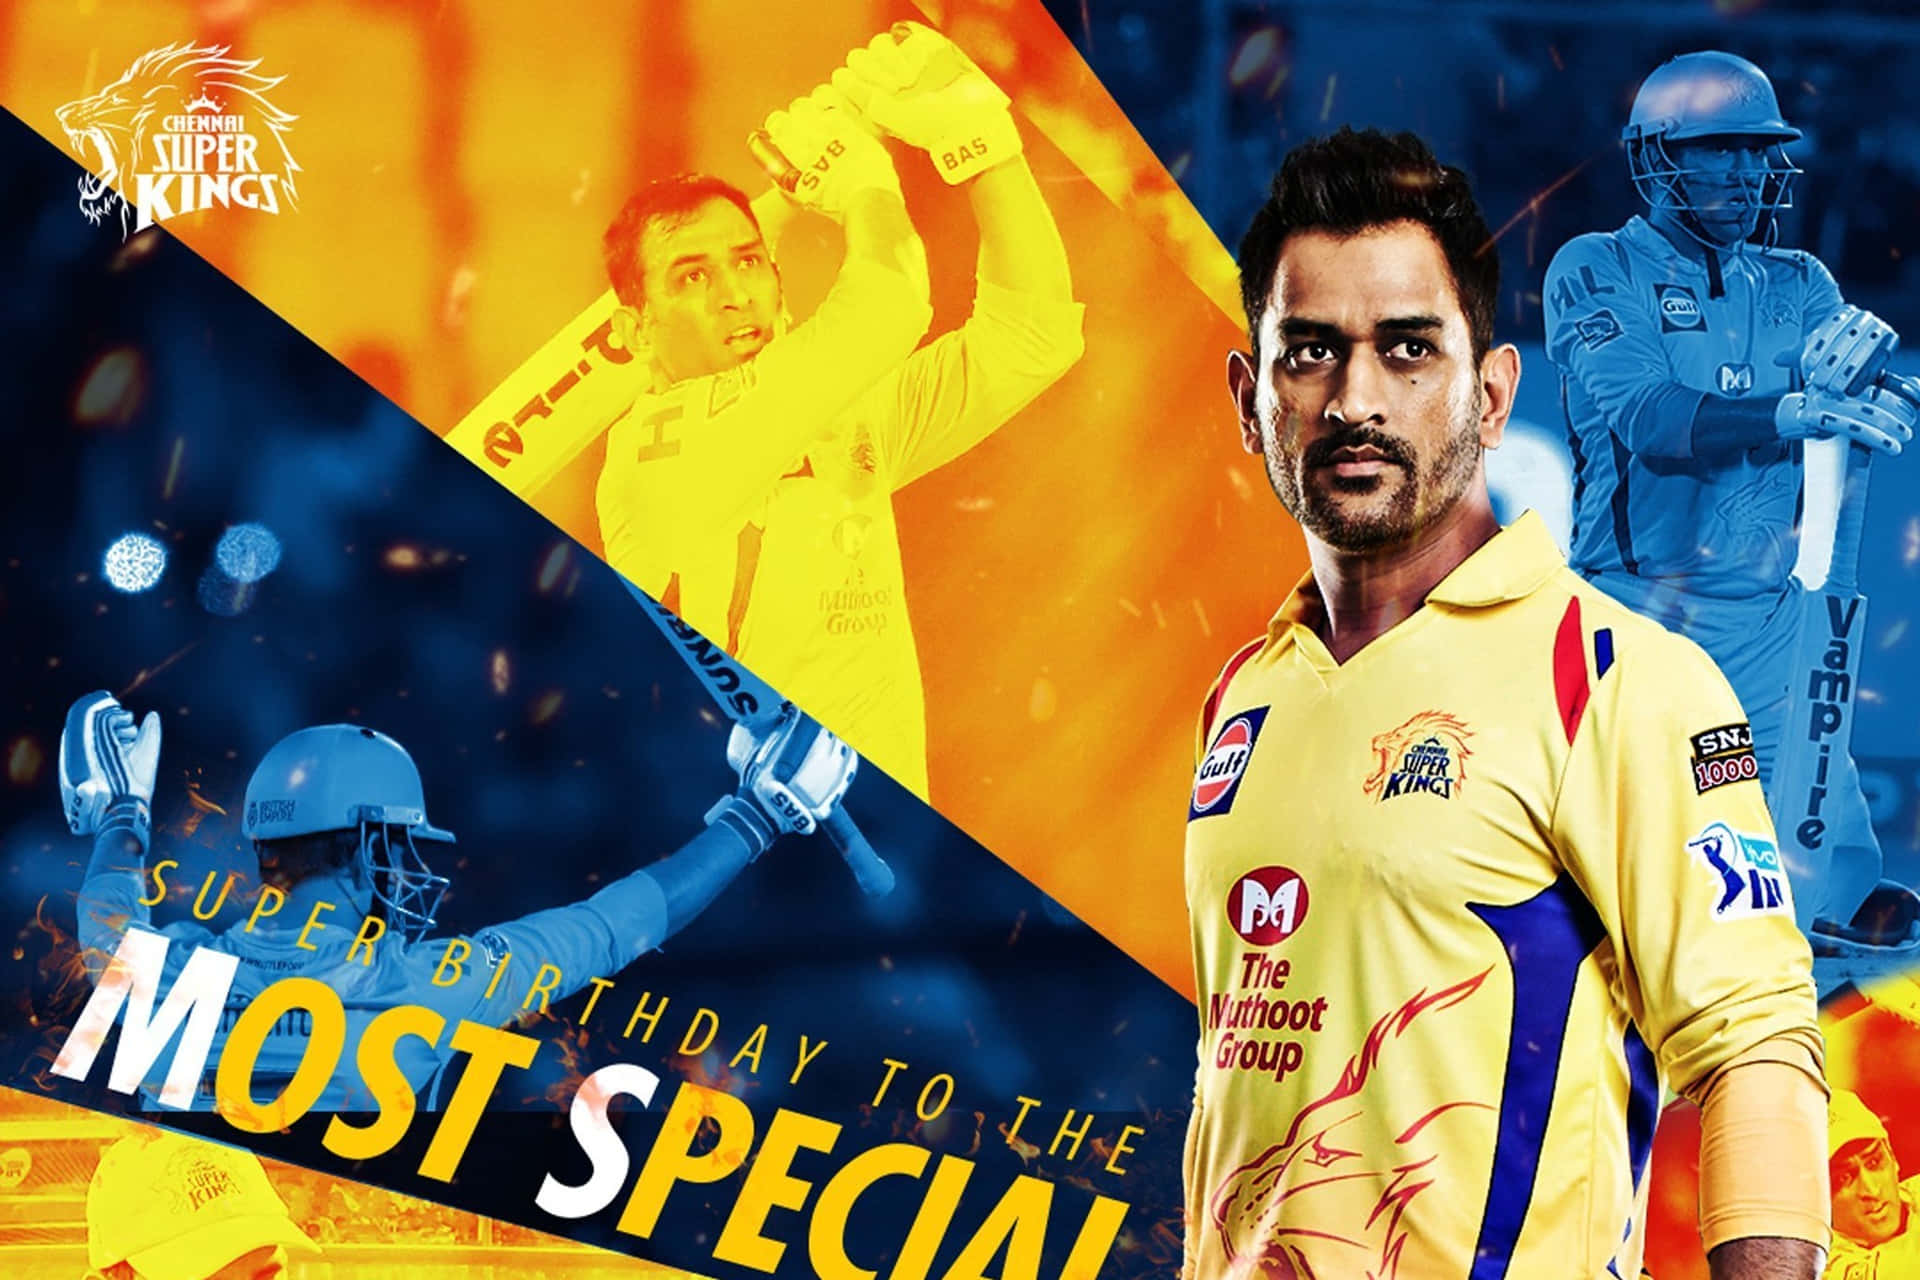 chennai super kings players wallpapers